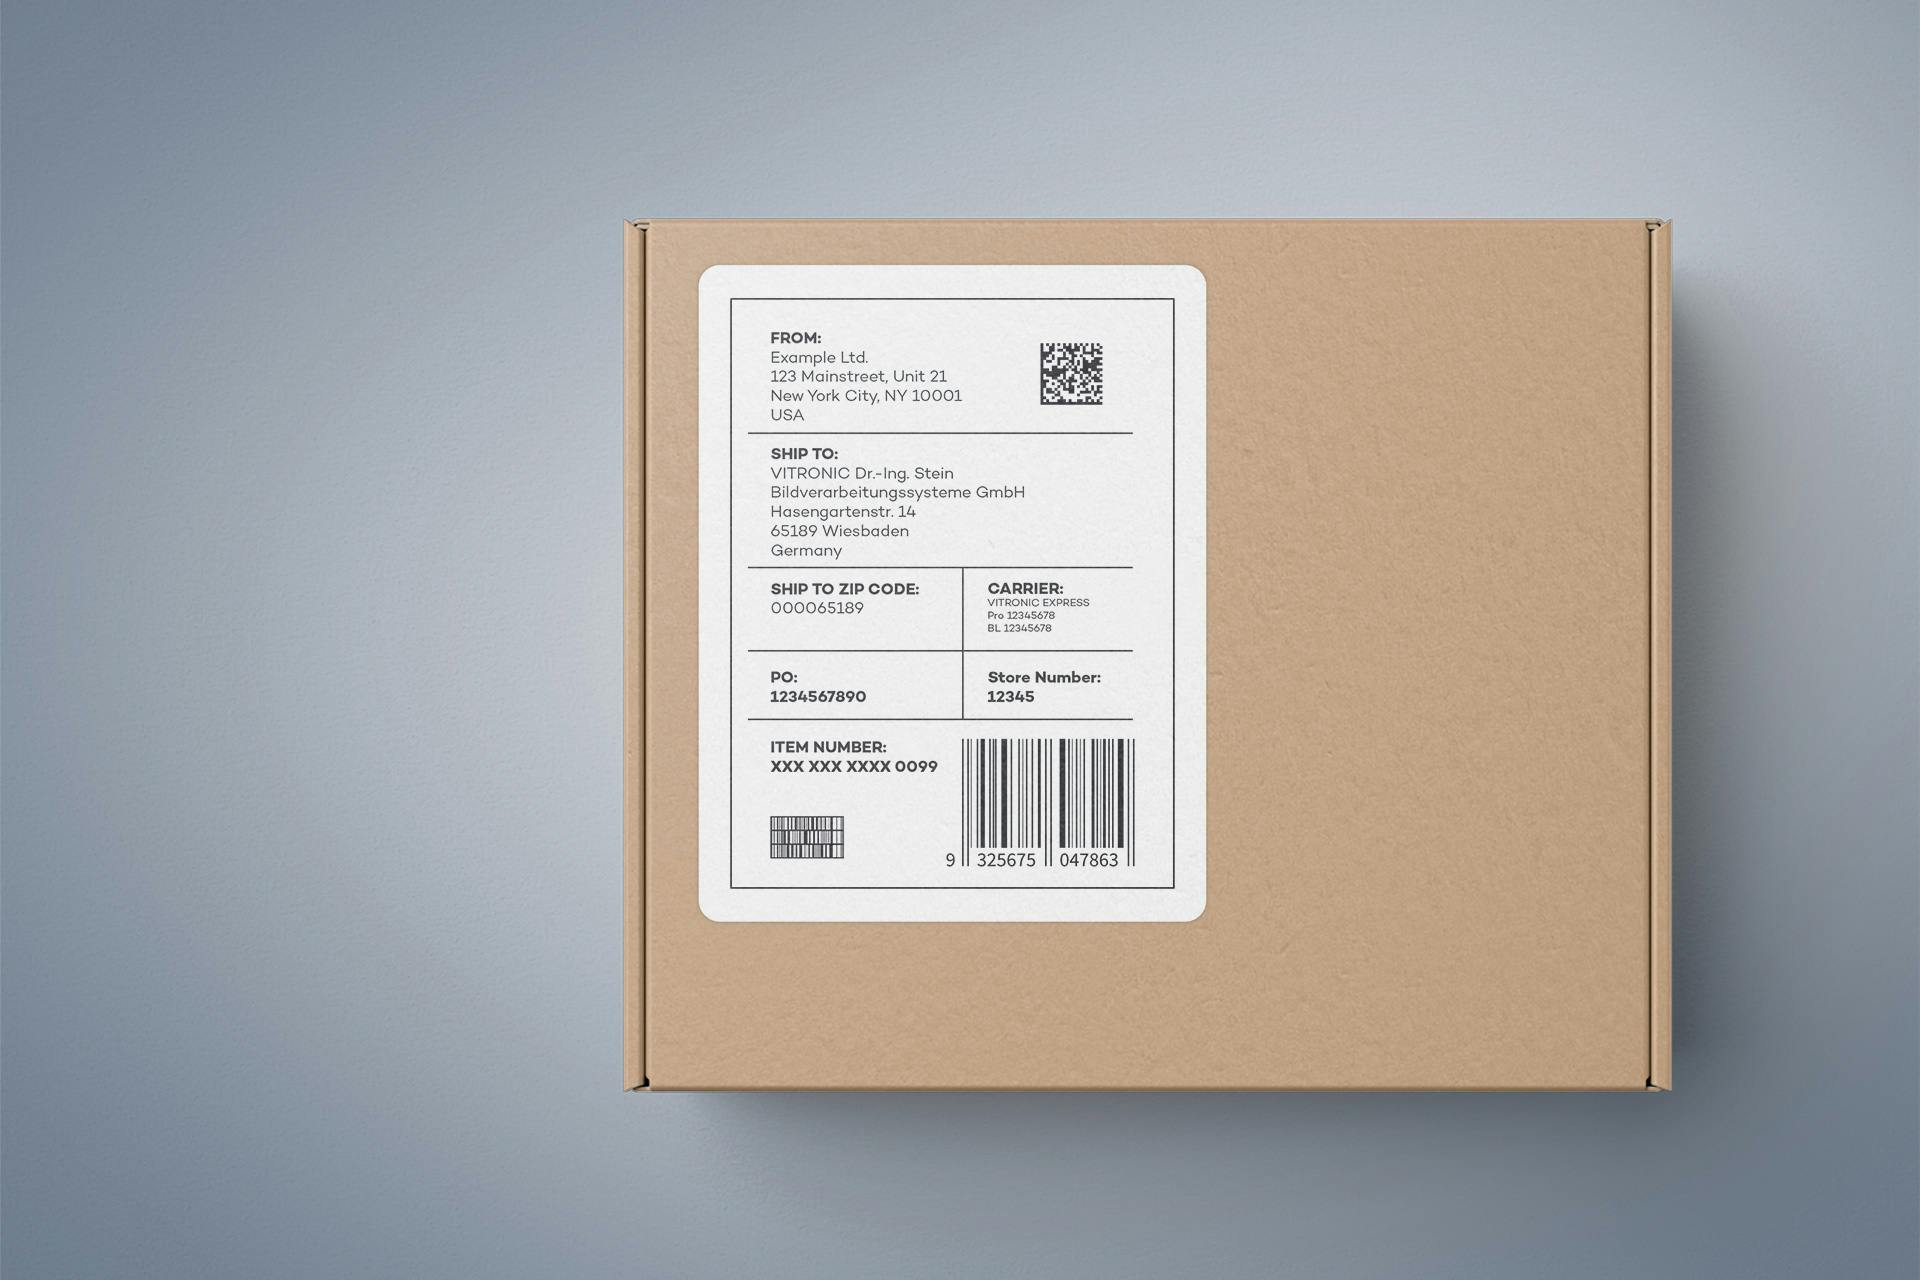 VIPAC Auto-ID systems automatically capture codes and plain text on parcels in the goods receiving area.